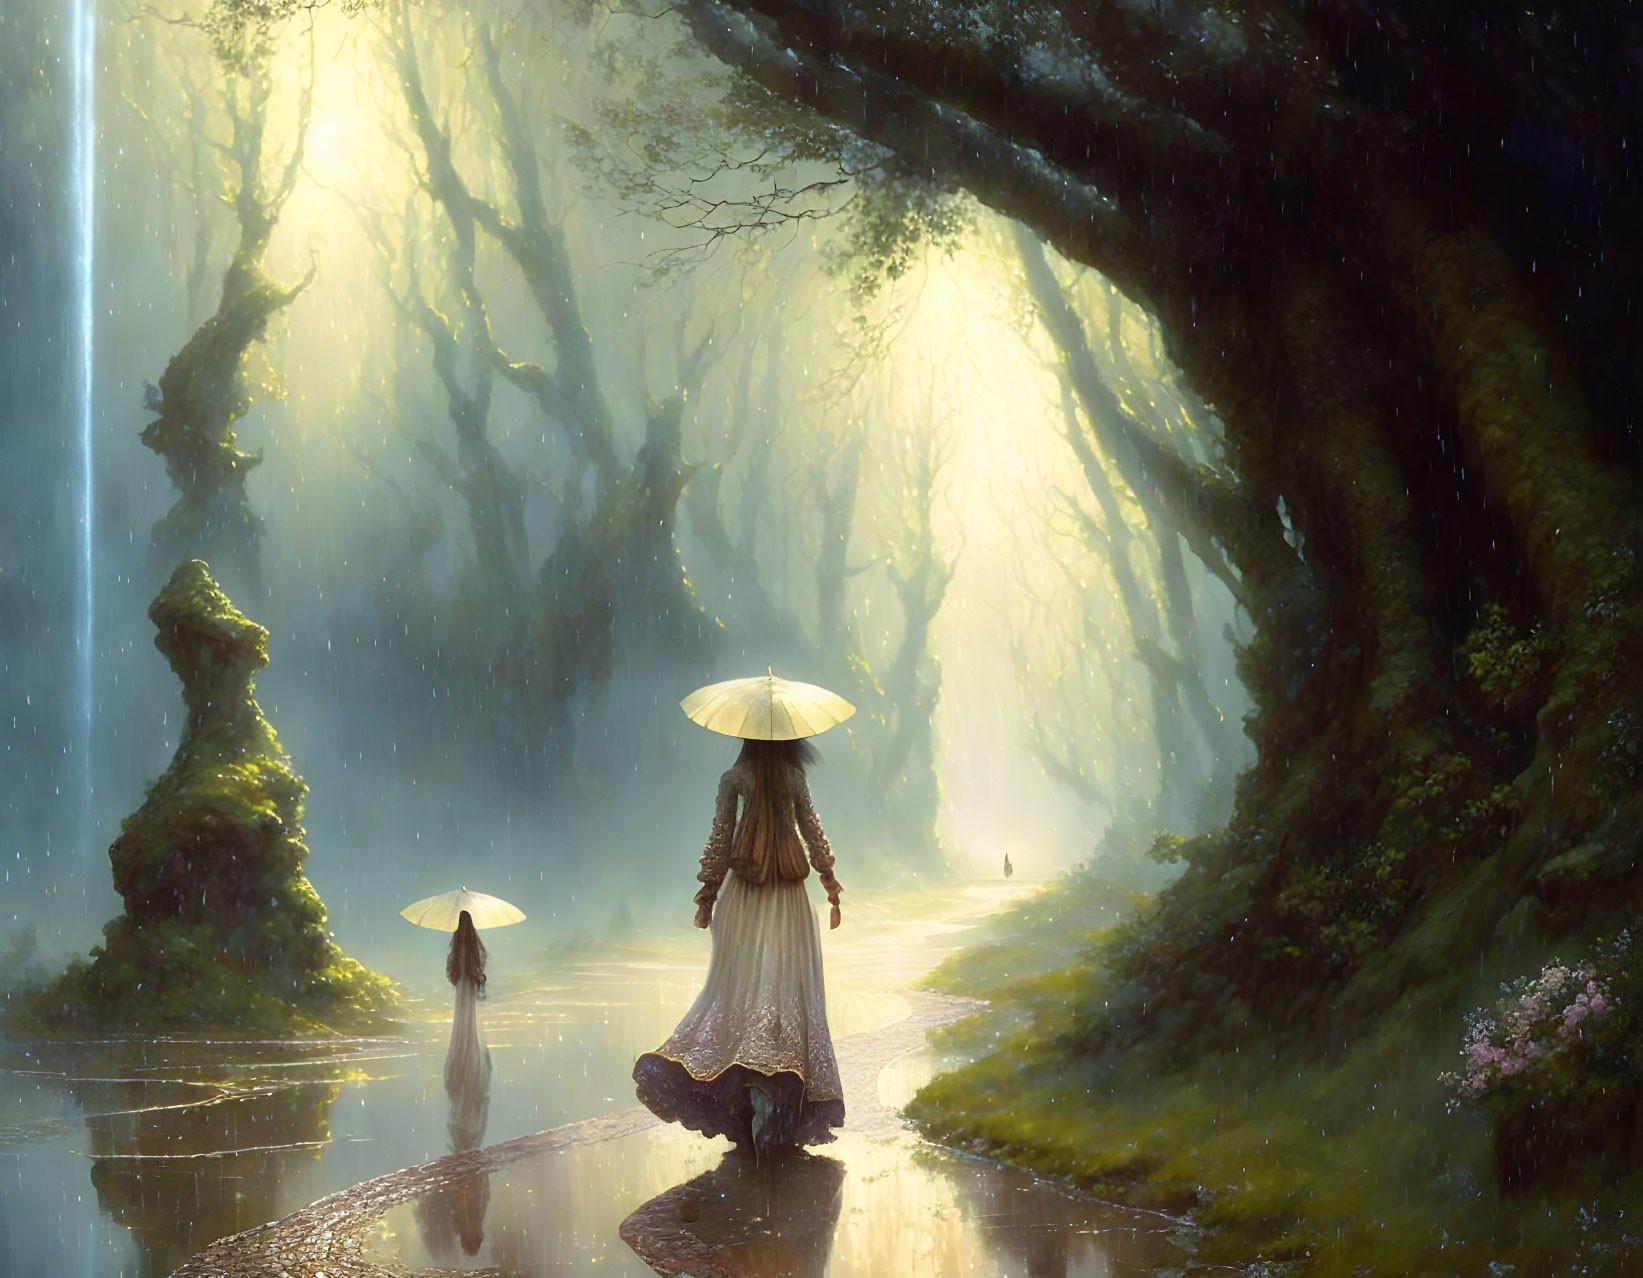 Tranquil forest scene with figures and umbrellas in sunlight